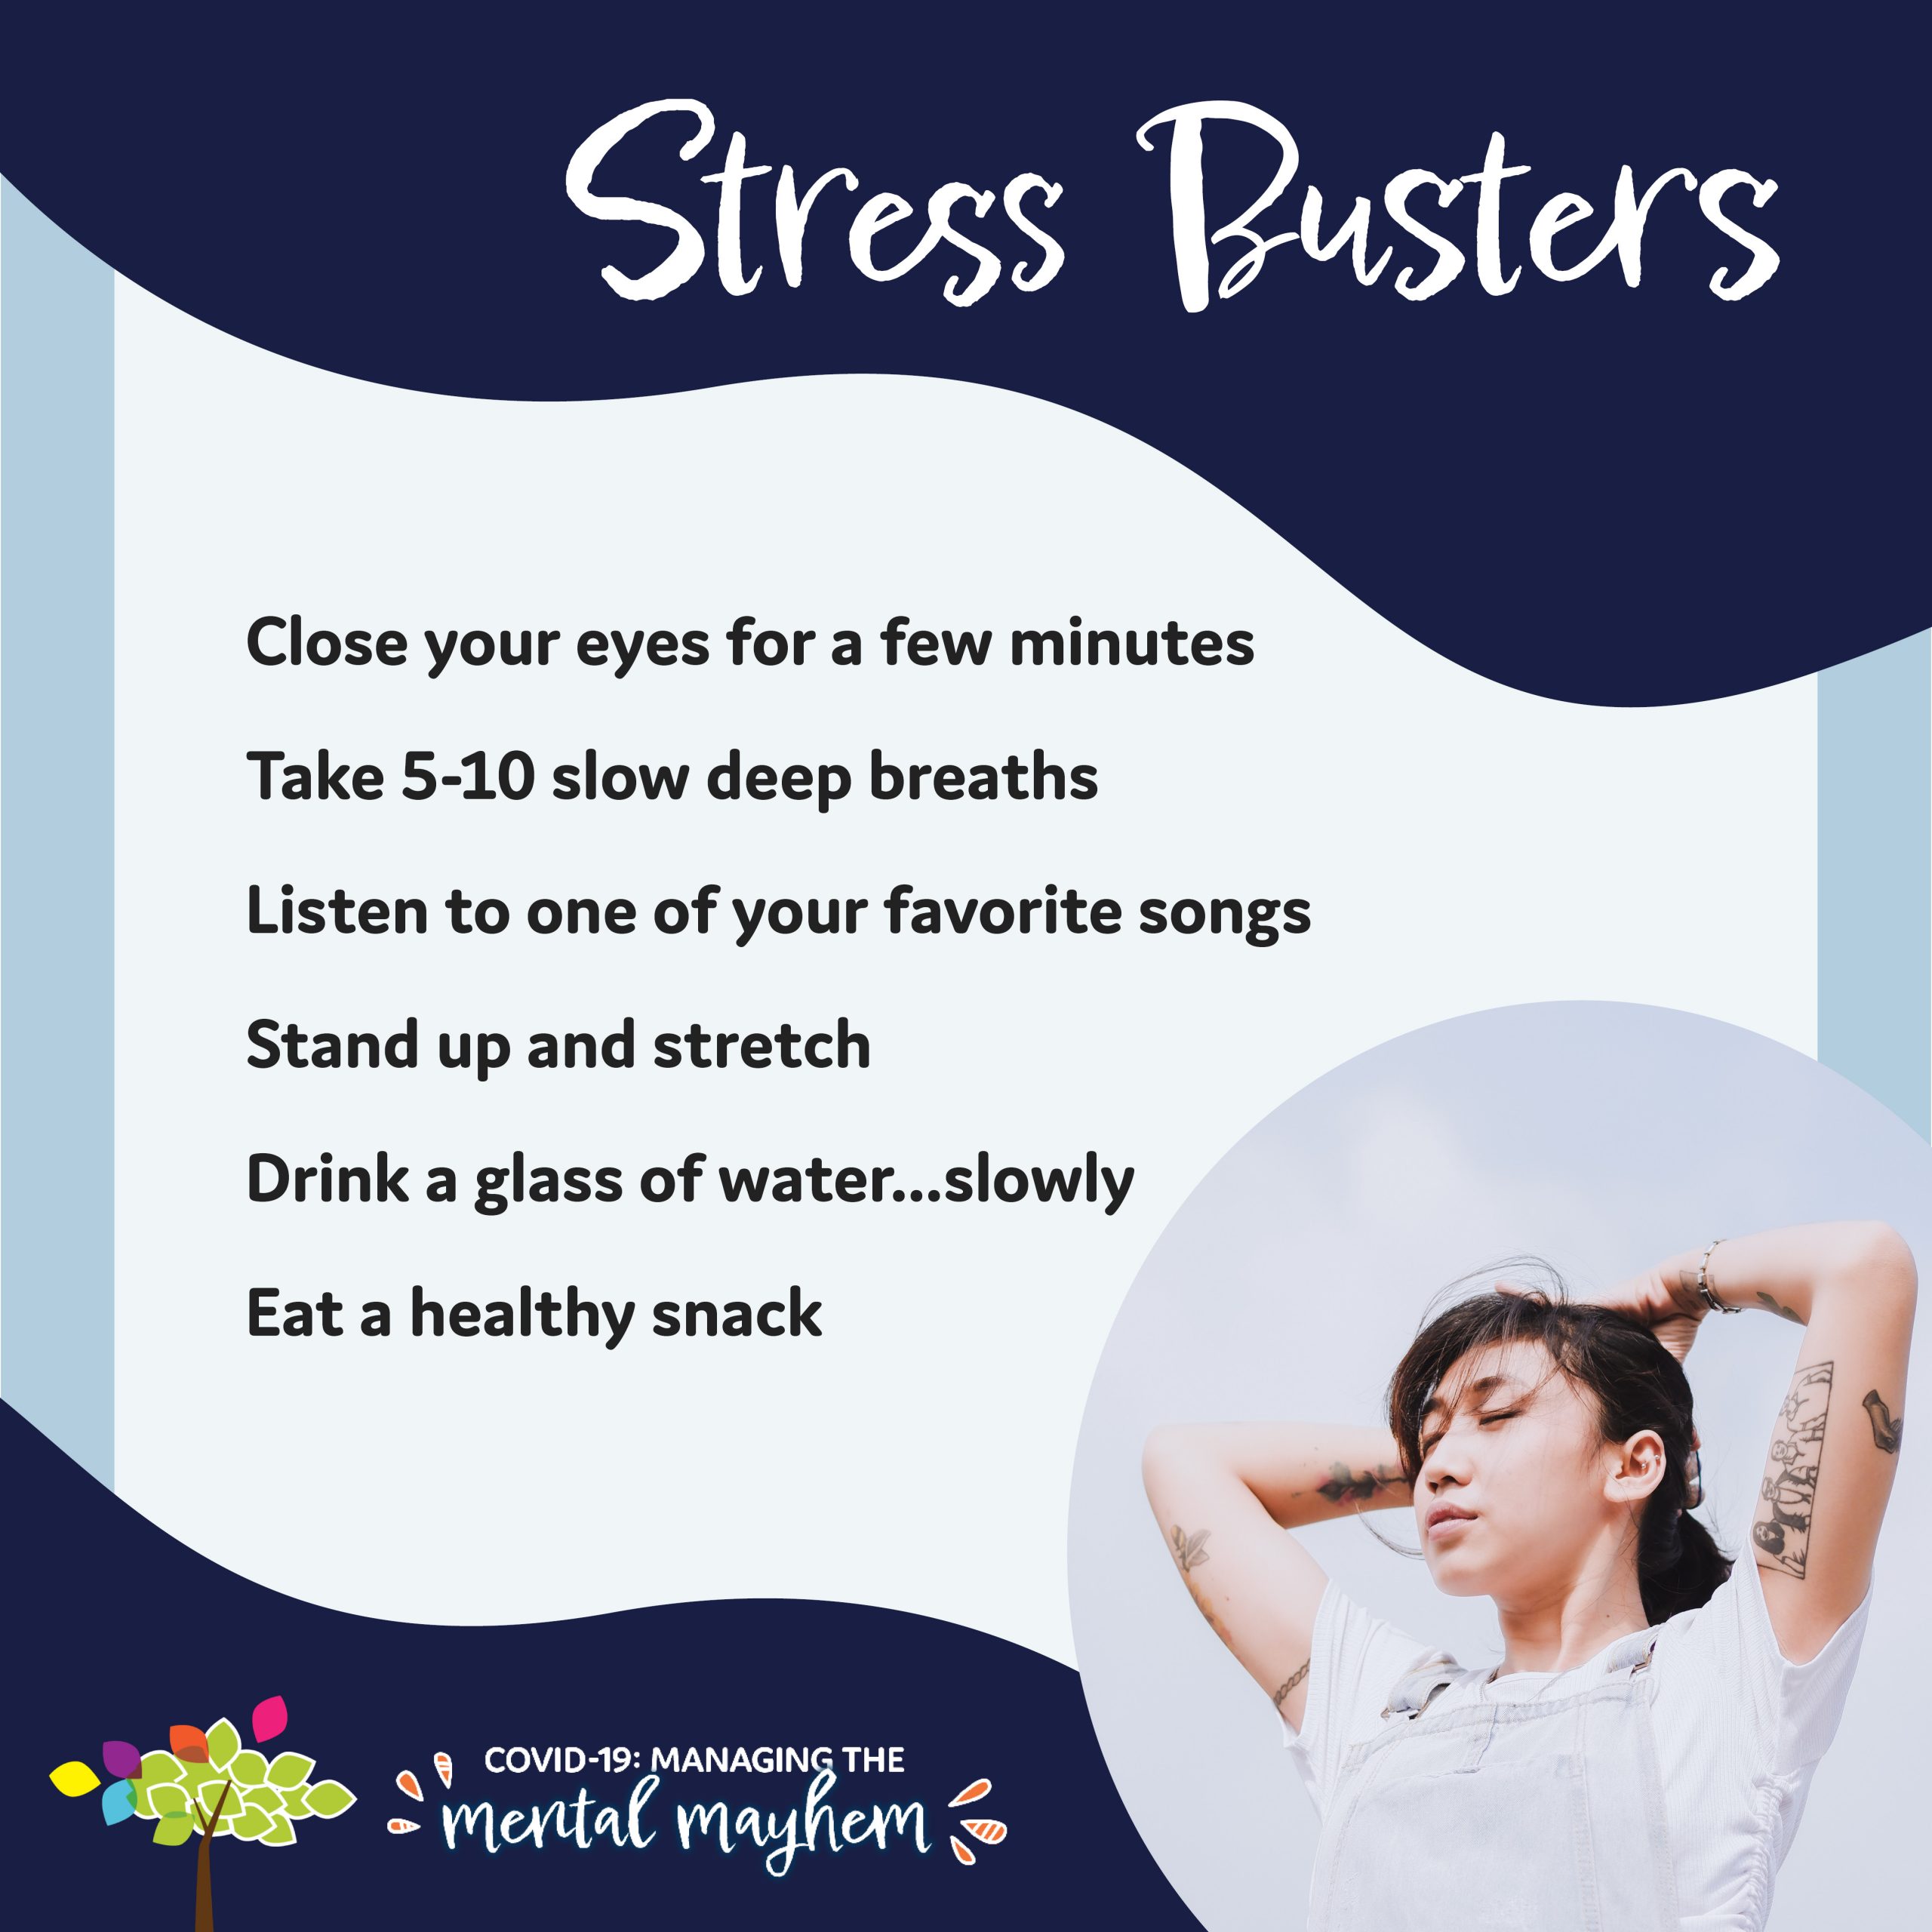 Close your eyes for a few minutes; take 5-10 slow, deep breaths; listen to one of your favorite songs; stand up and stretch; drink a glass of water...slowly; eat a healthy snack